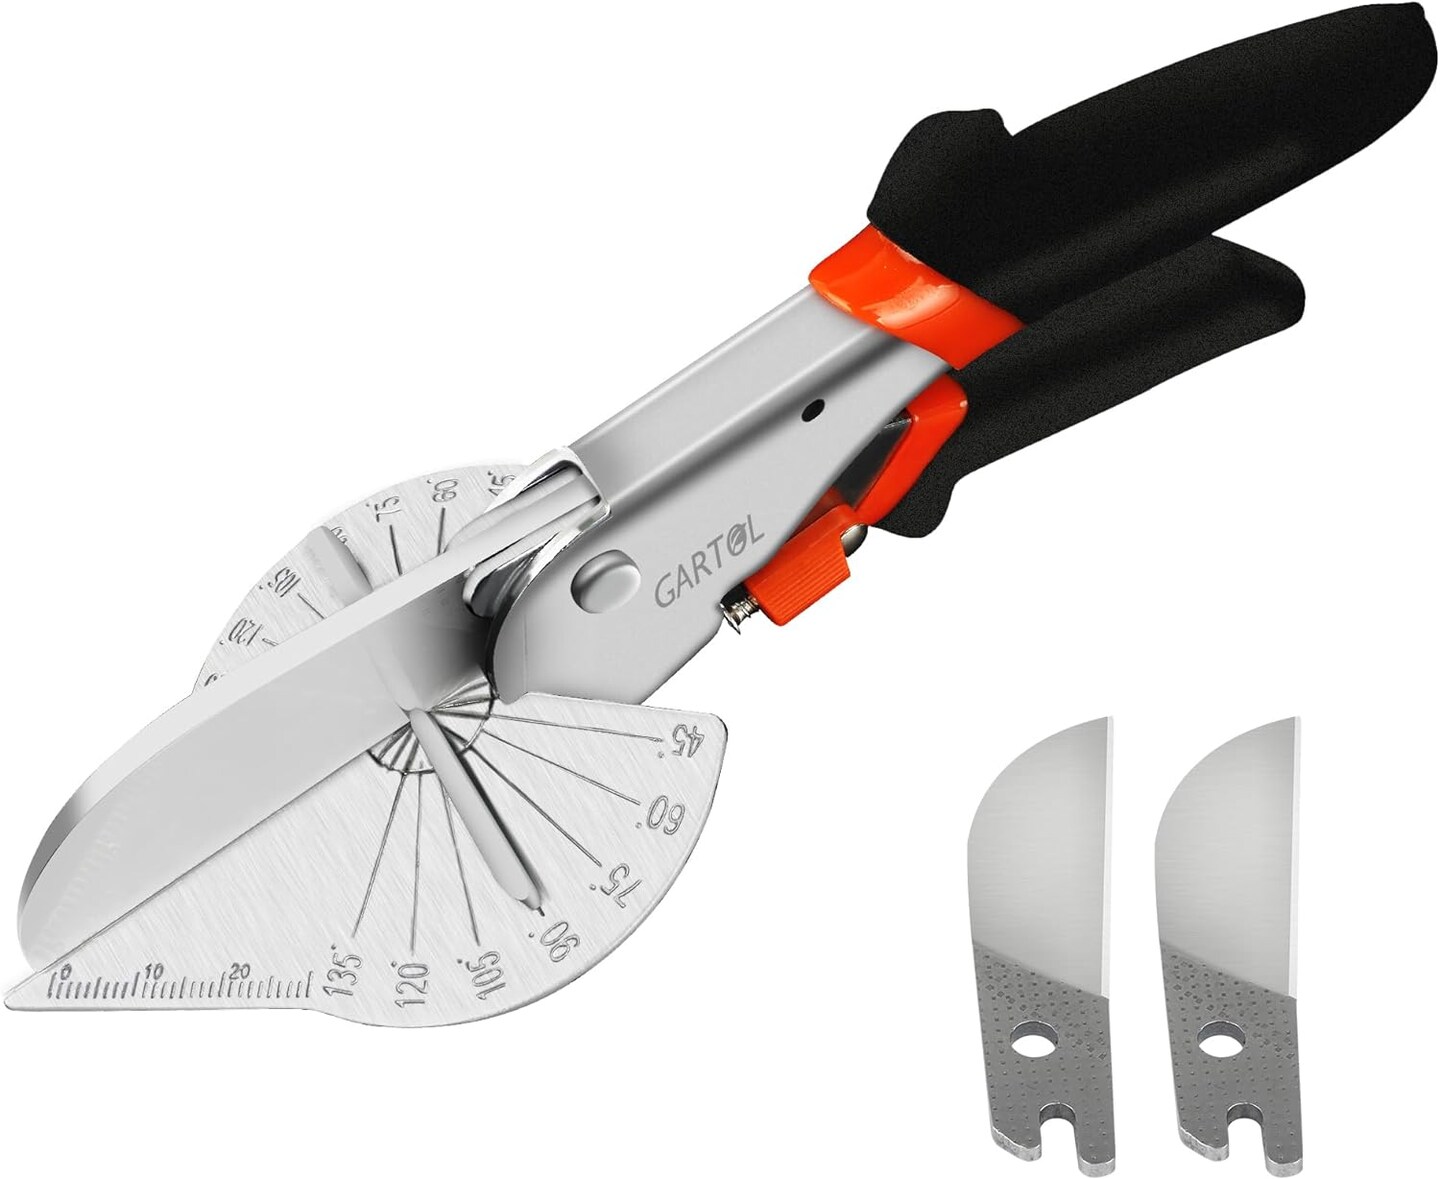 GARTOL Multifunctional Trunking/Miter Shears with Replacement Blades